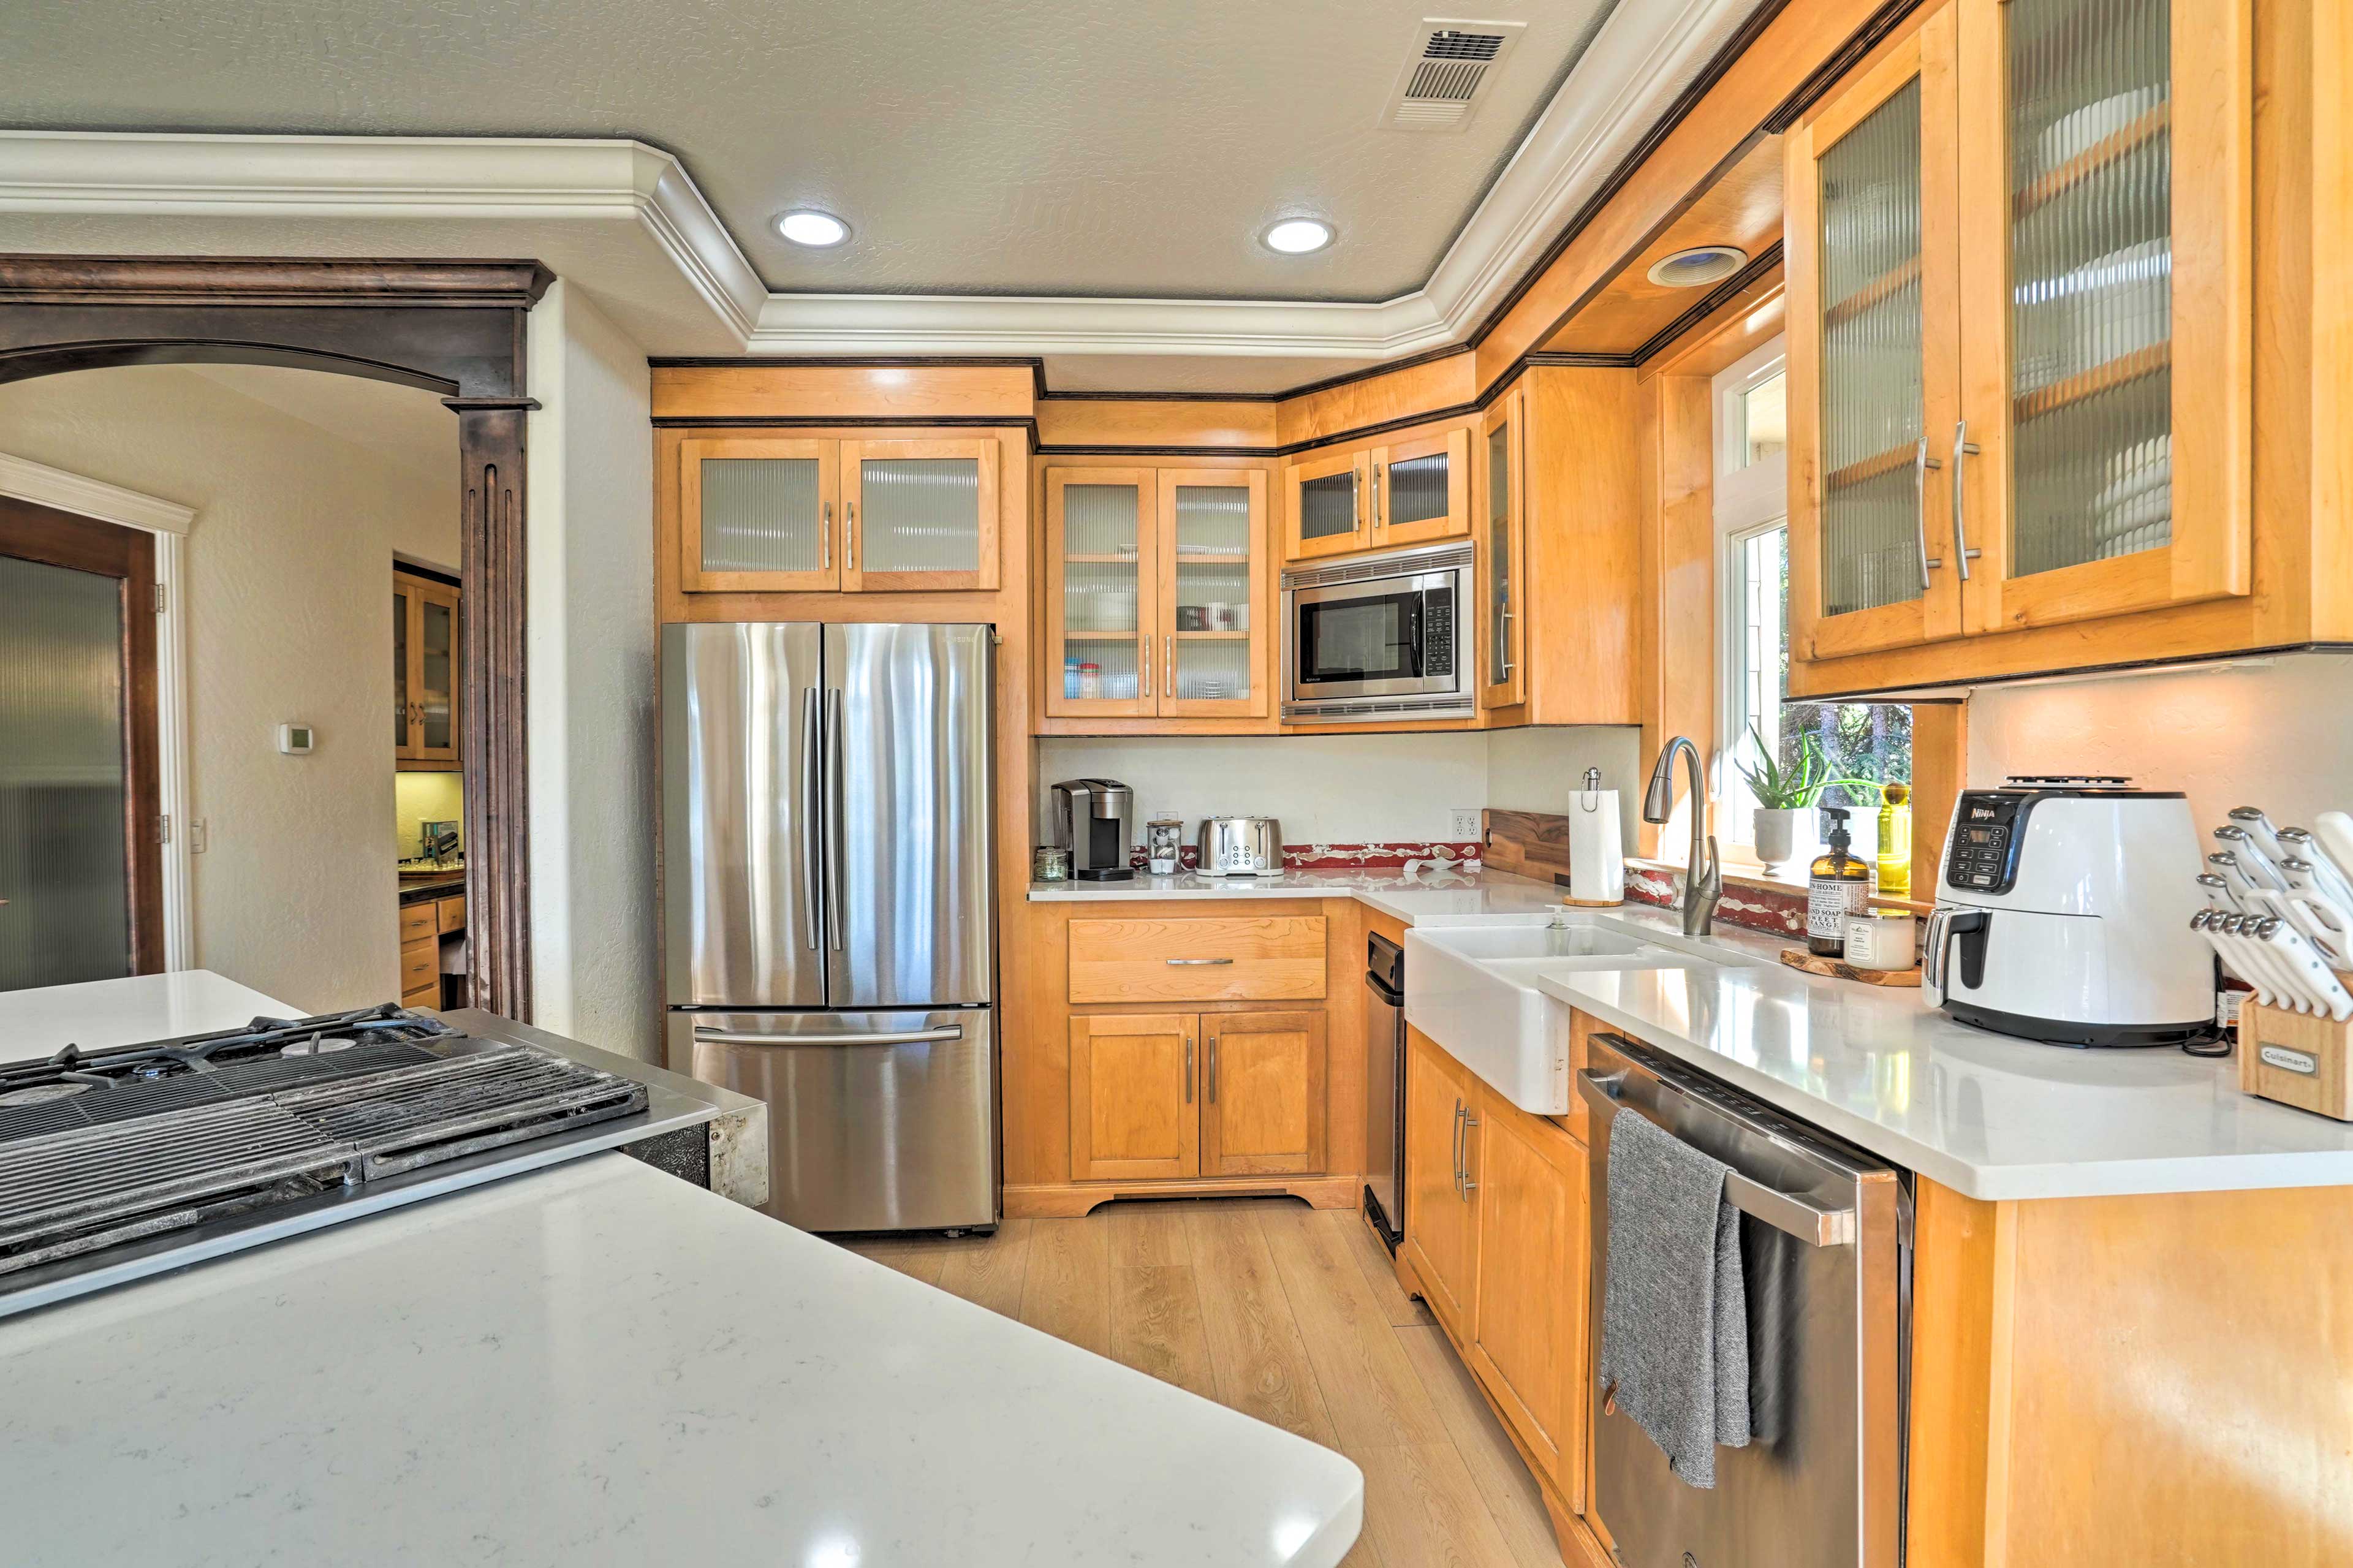 Kitchen | Fully Equipped | Cooking Basics | Coffee Maker | Dishware/Flatware